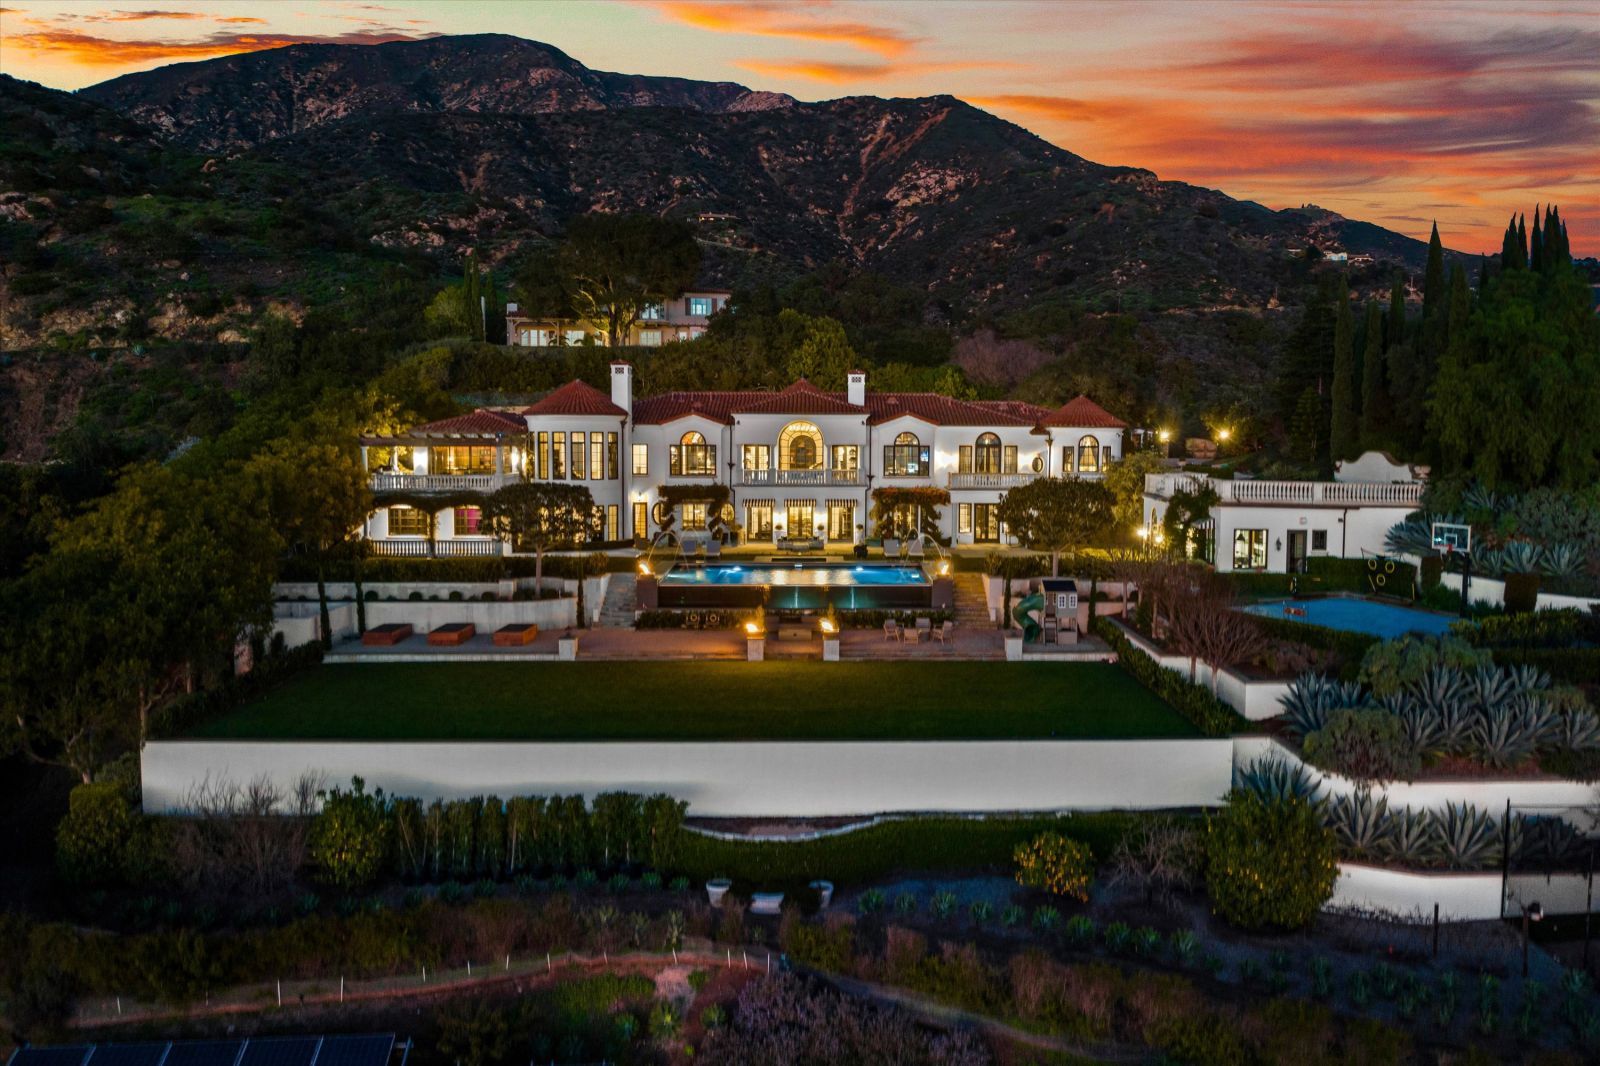 The front view of a multi-level Montecito Estate at sunset, lit up from withinwith a red tiled roof and white stucco exterior surrounded by lush vegetation and the mountains in the background